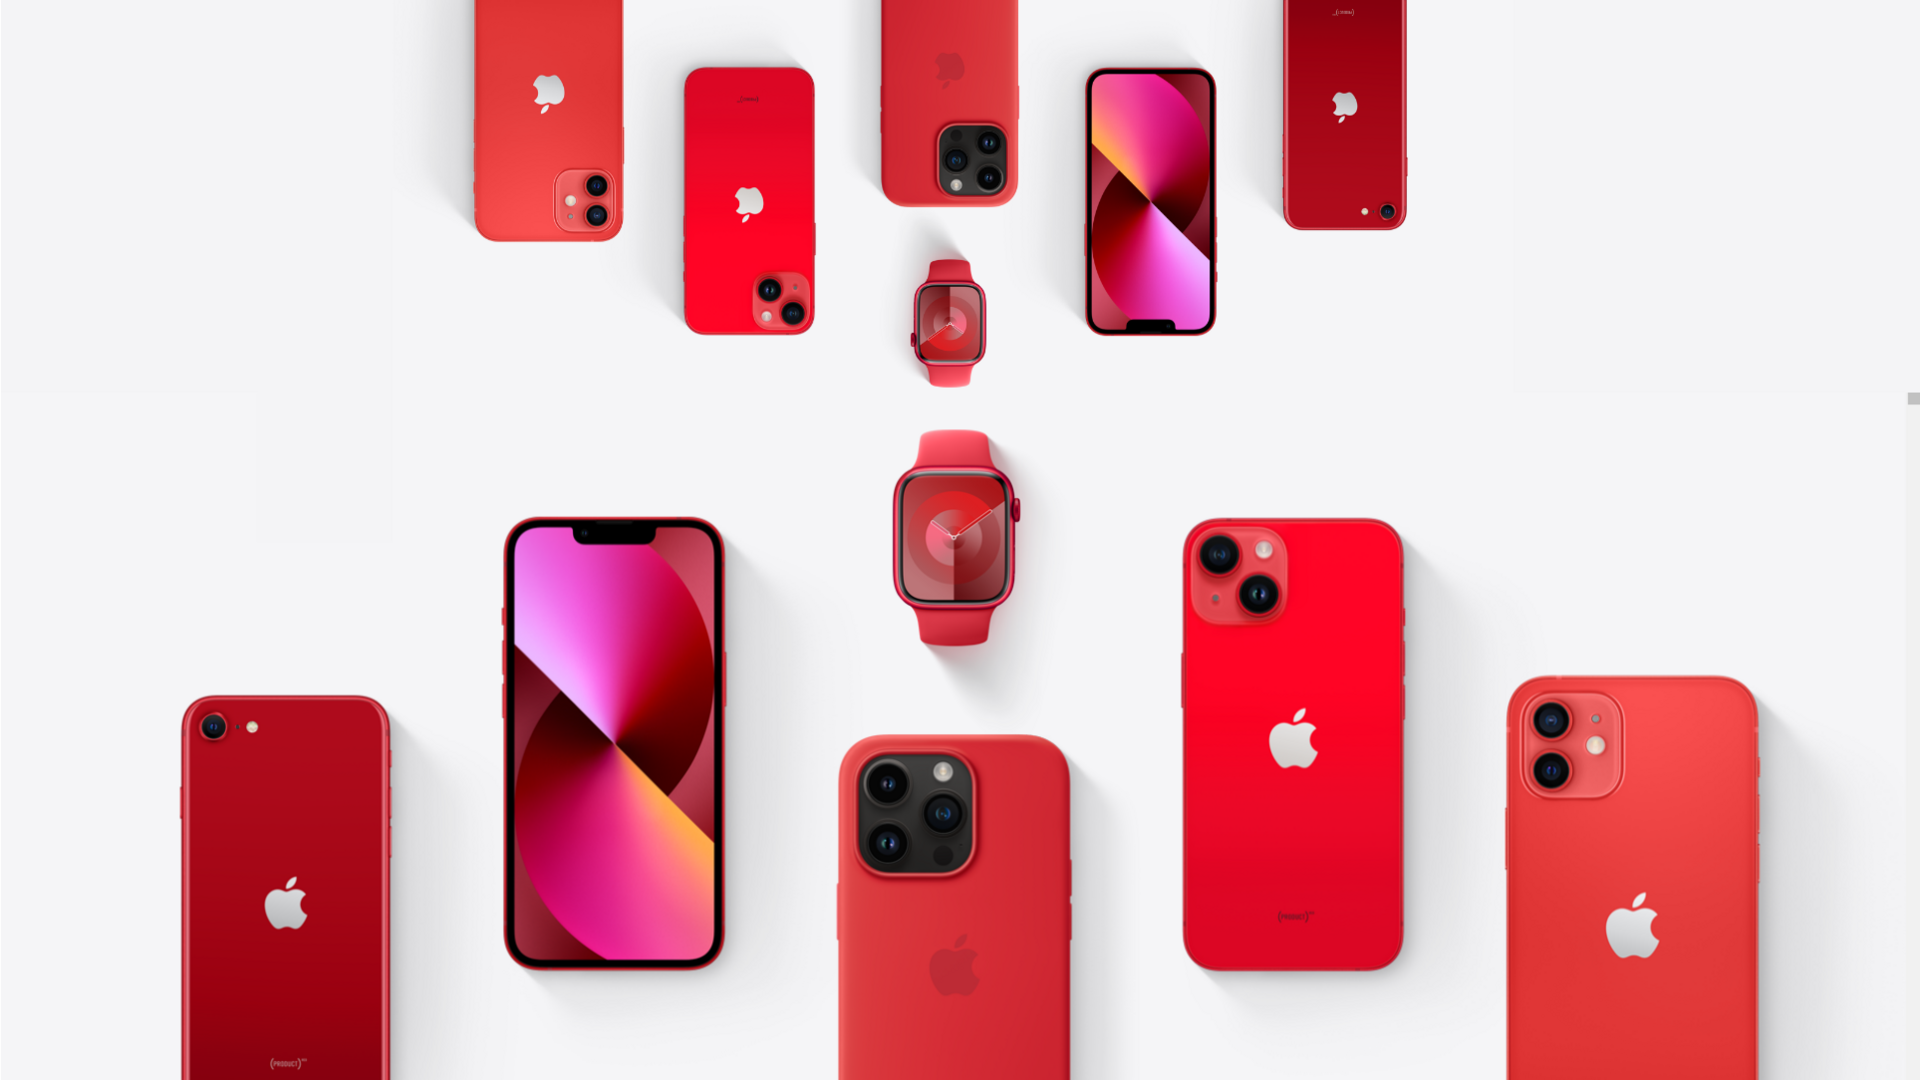 Apple's (PRODUCT)RED color branding has much deeper cause